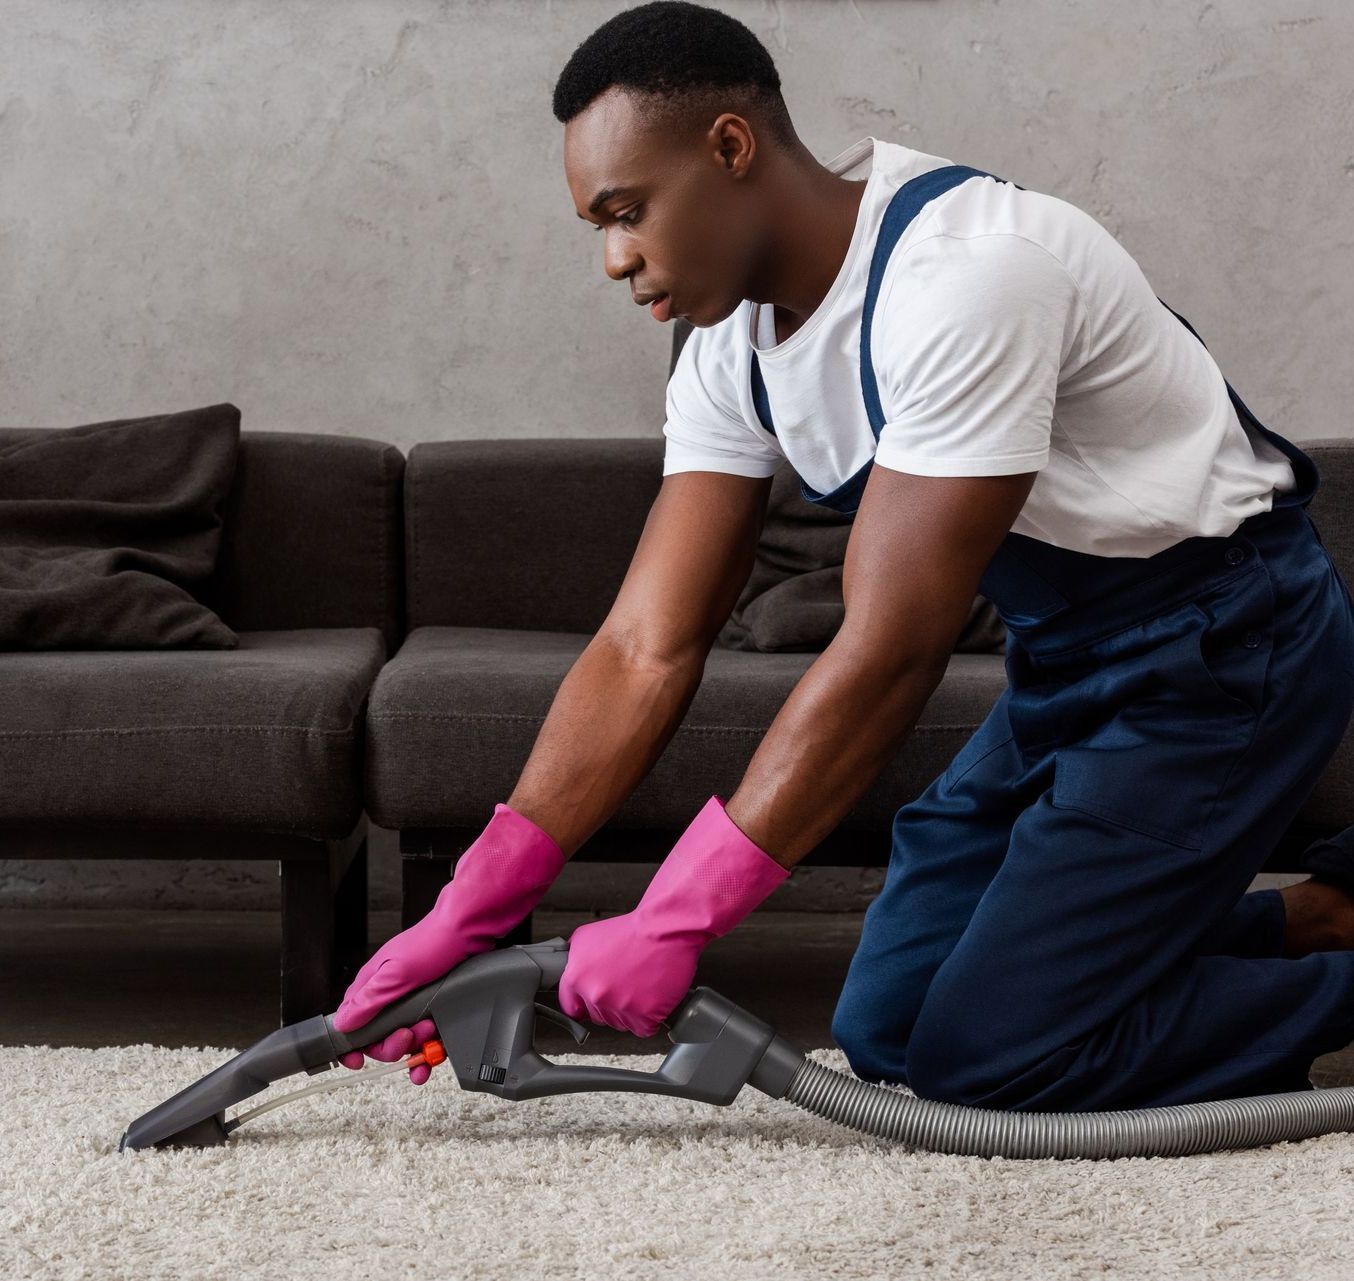 A man wearing pink gloves is cleaning a carpet with a vacuum cleaner.